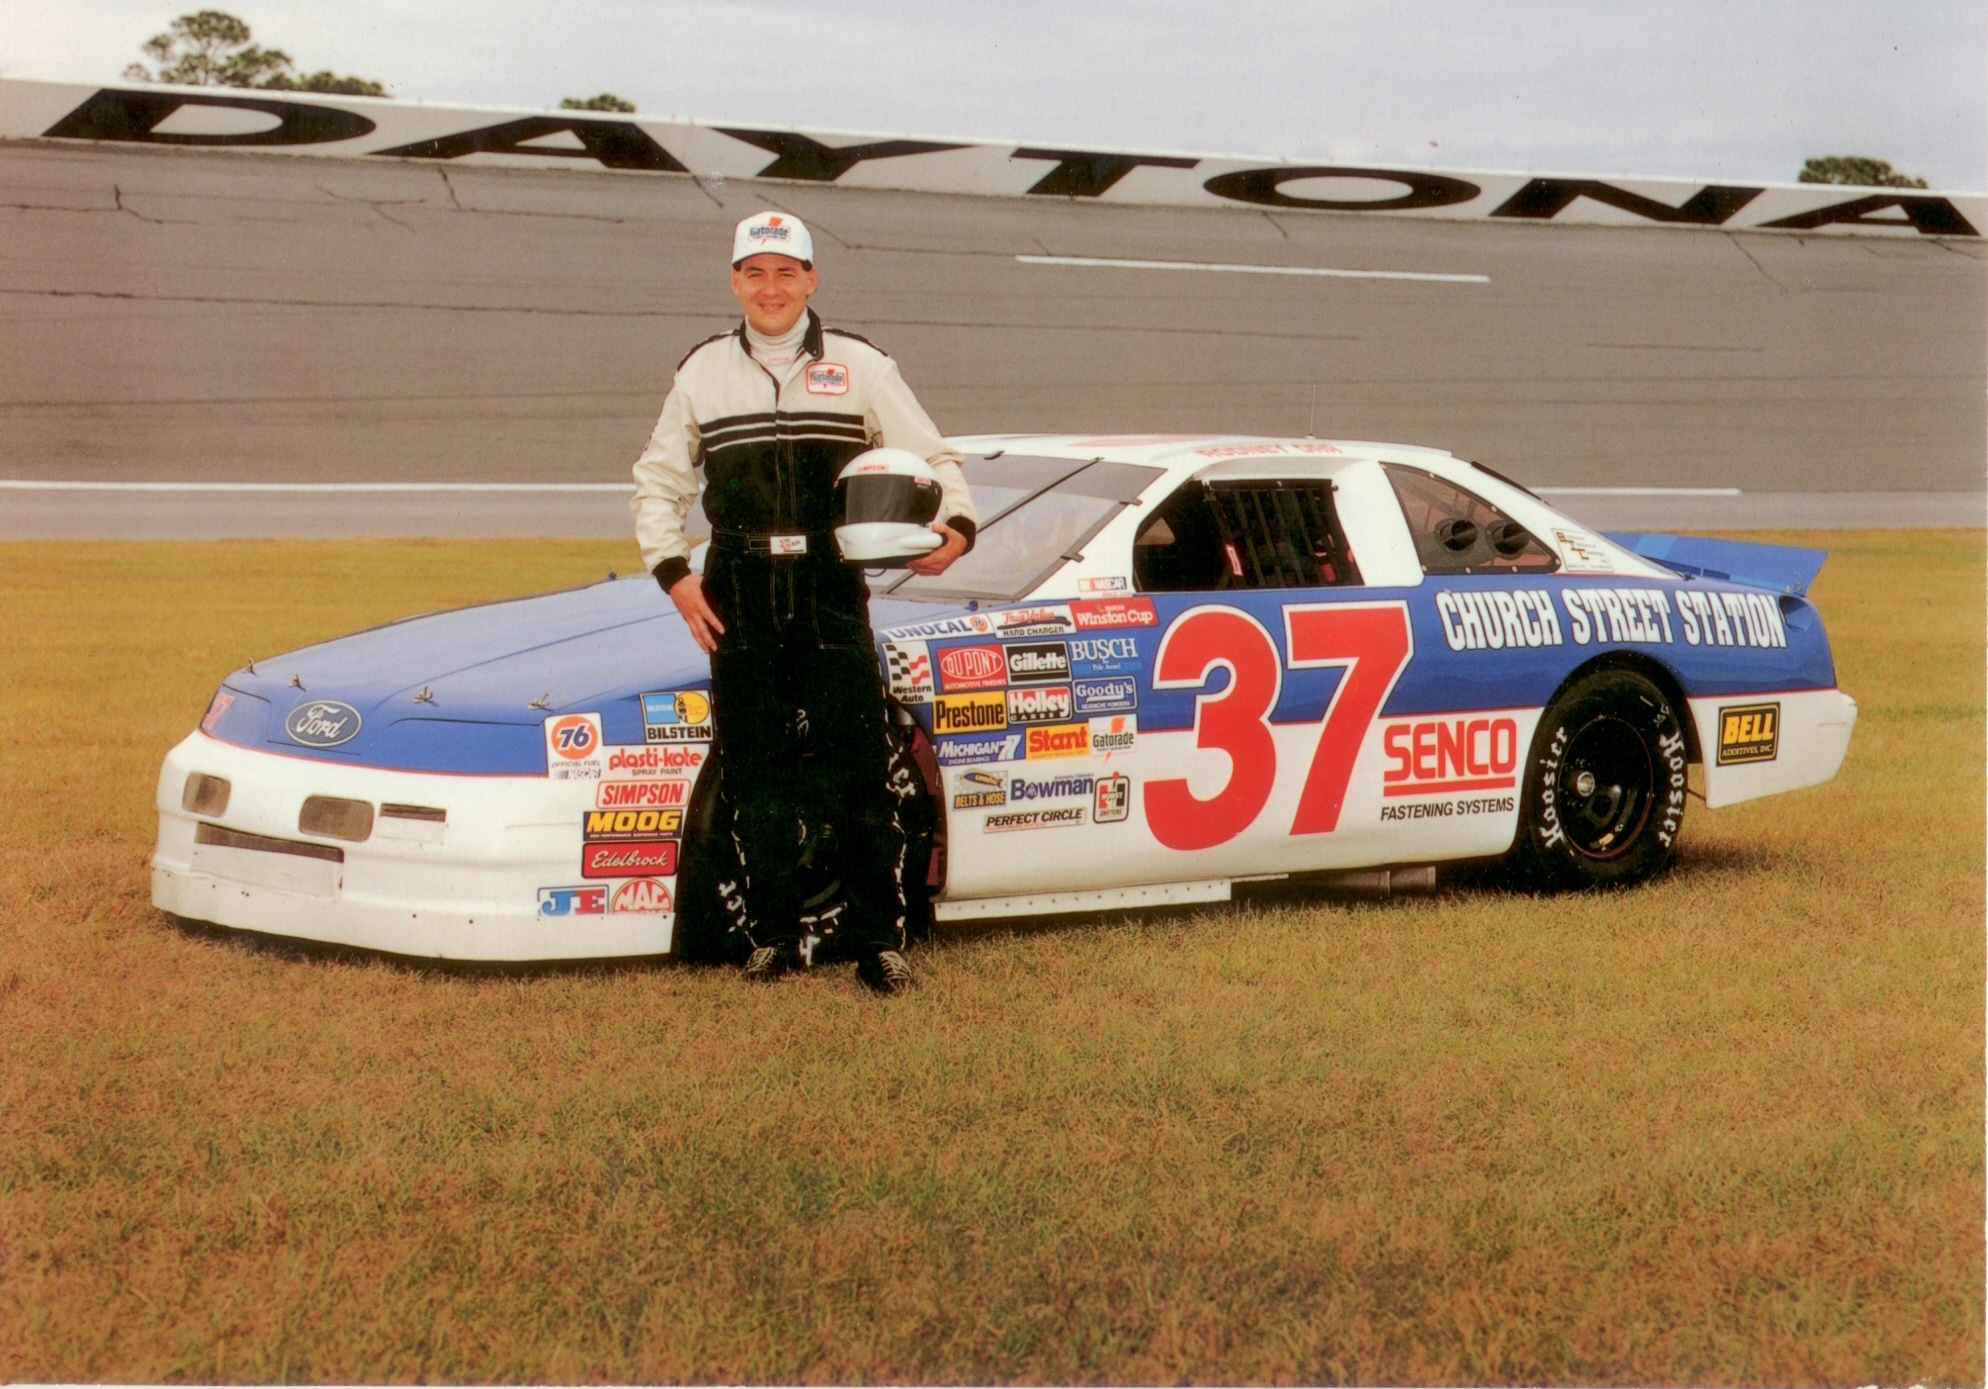 The late Rodney Orr with his Winston Cup car _Don Bok Photo_.jpg